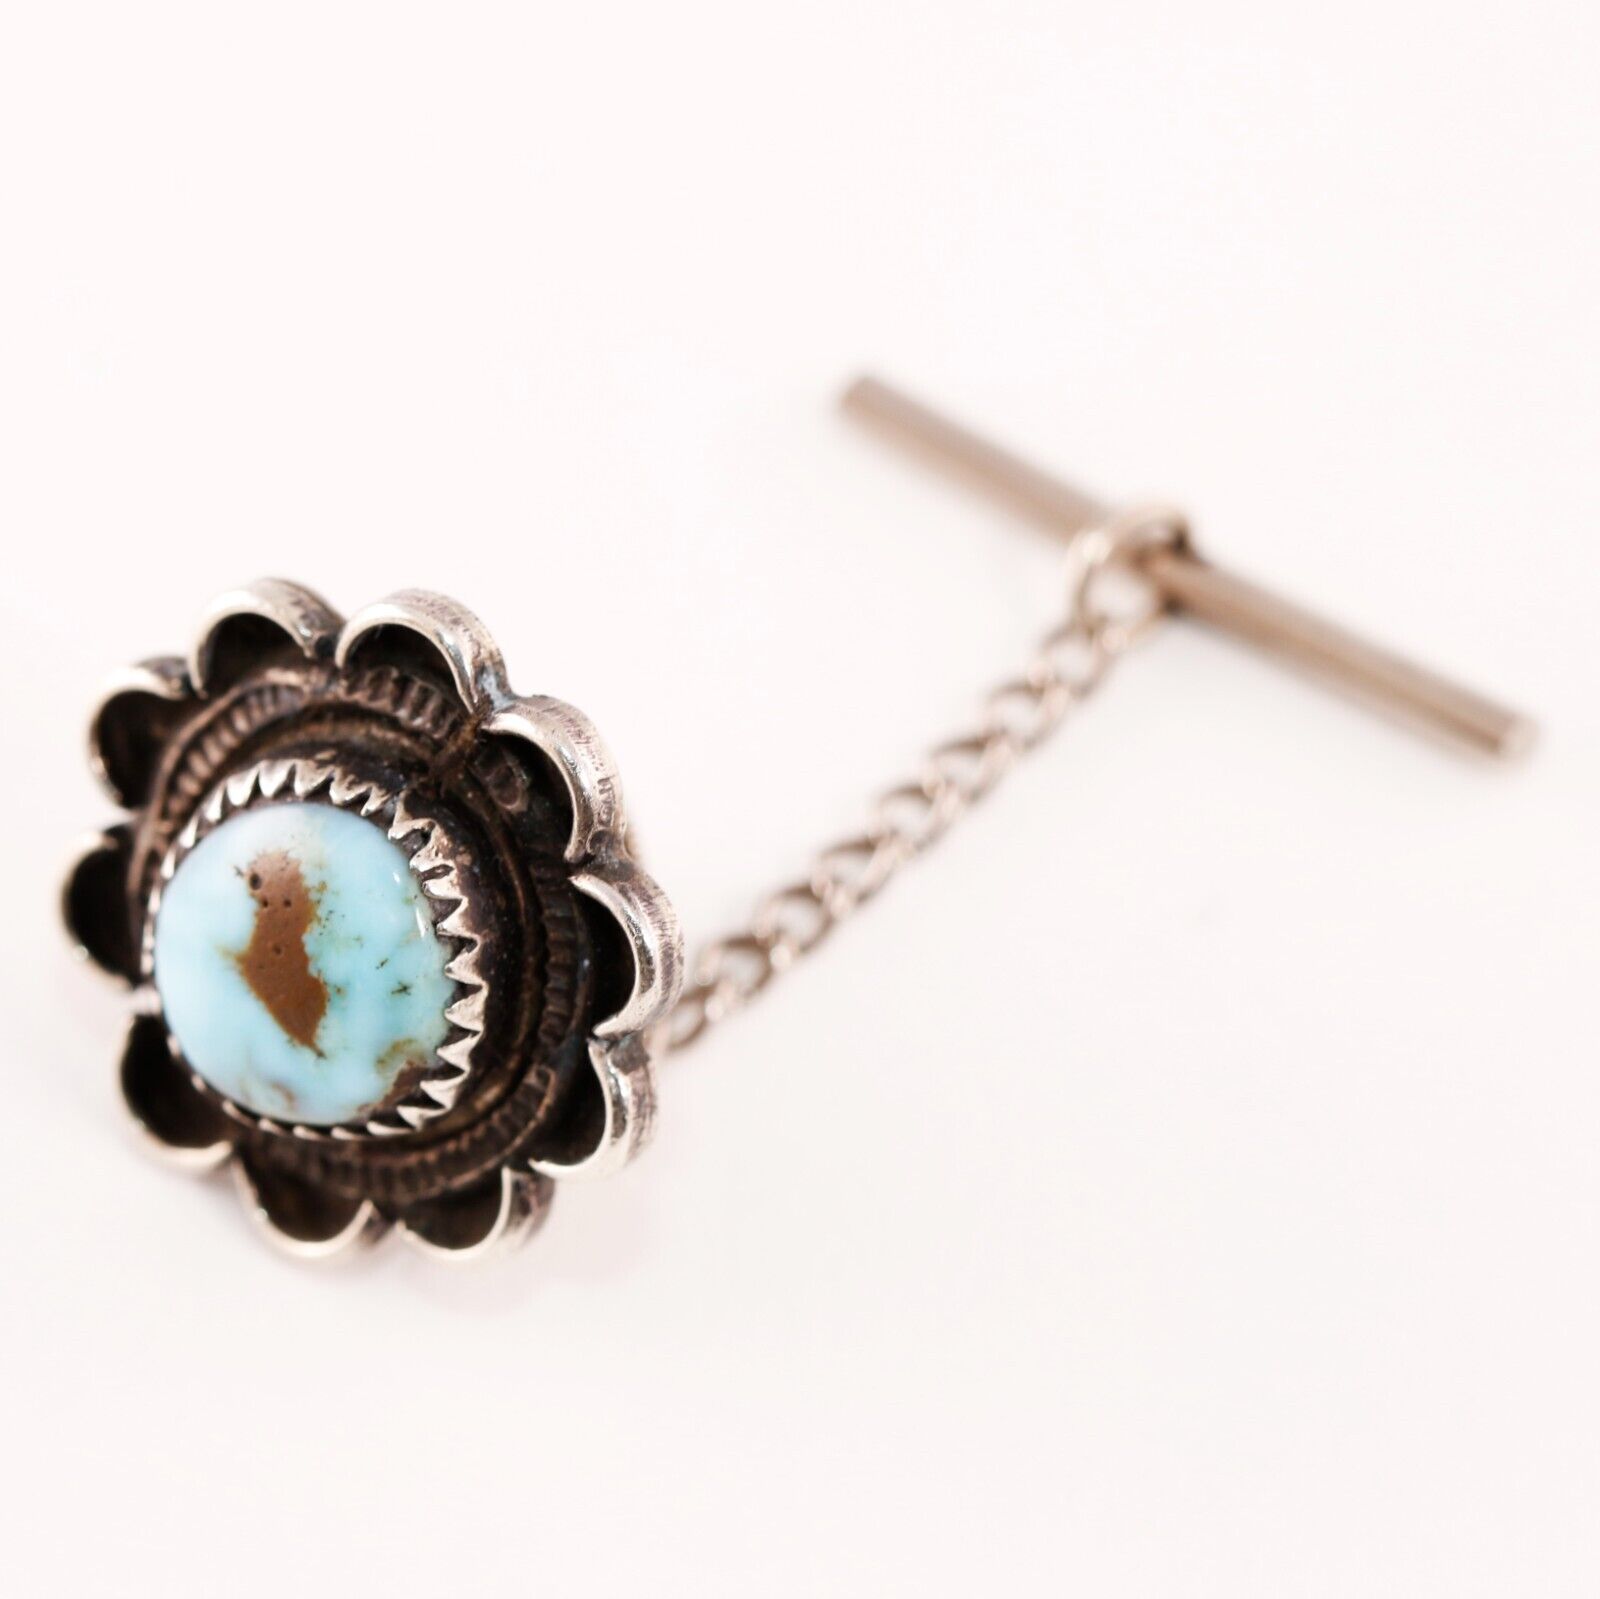 OLD PAWN STERLING SILVER BLUE TURQUOISE SCALLOPED EDGE ROPE BORDER TIE TACK